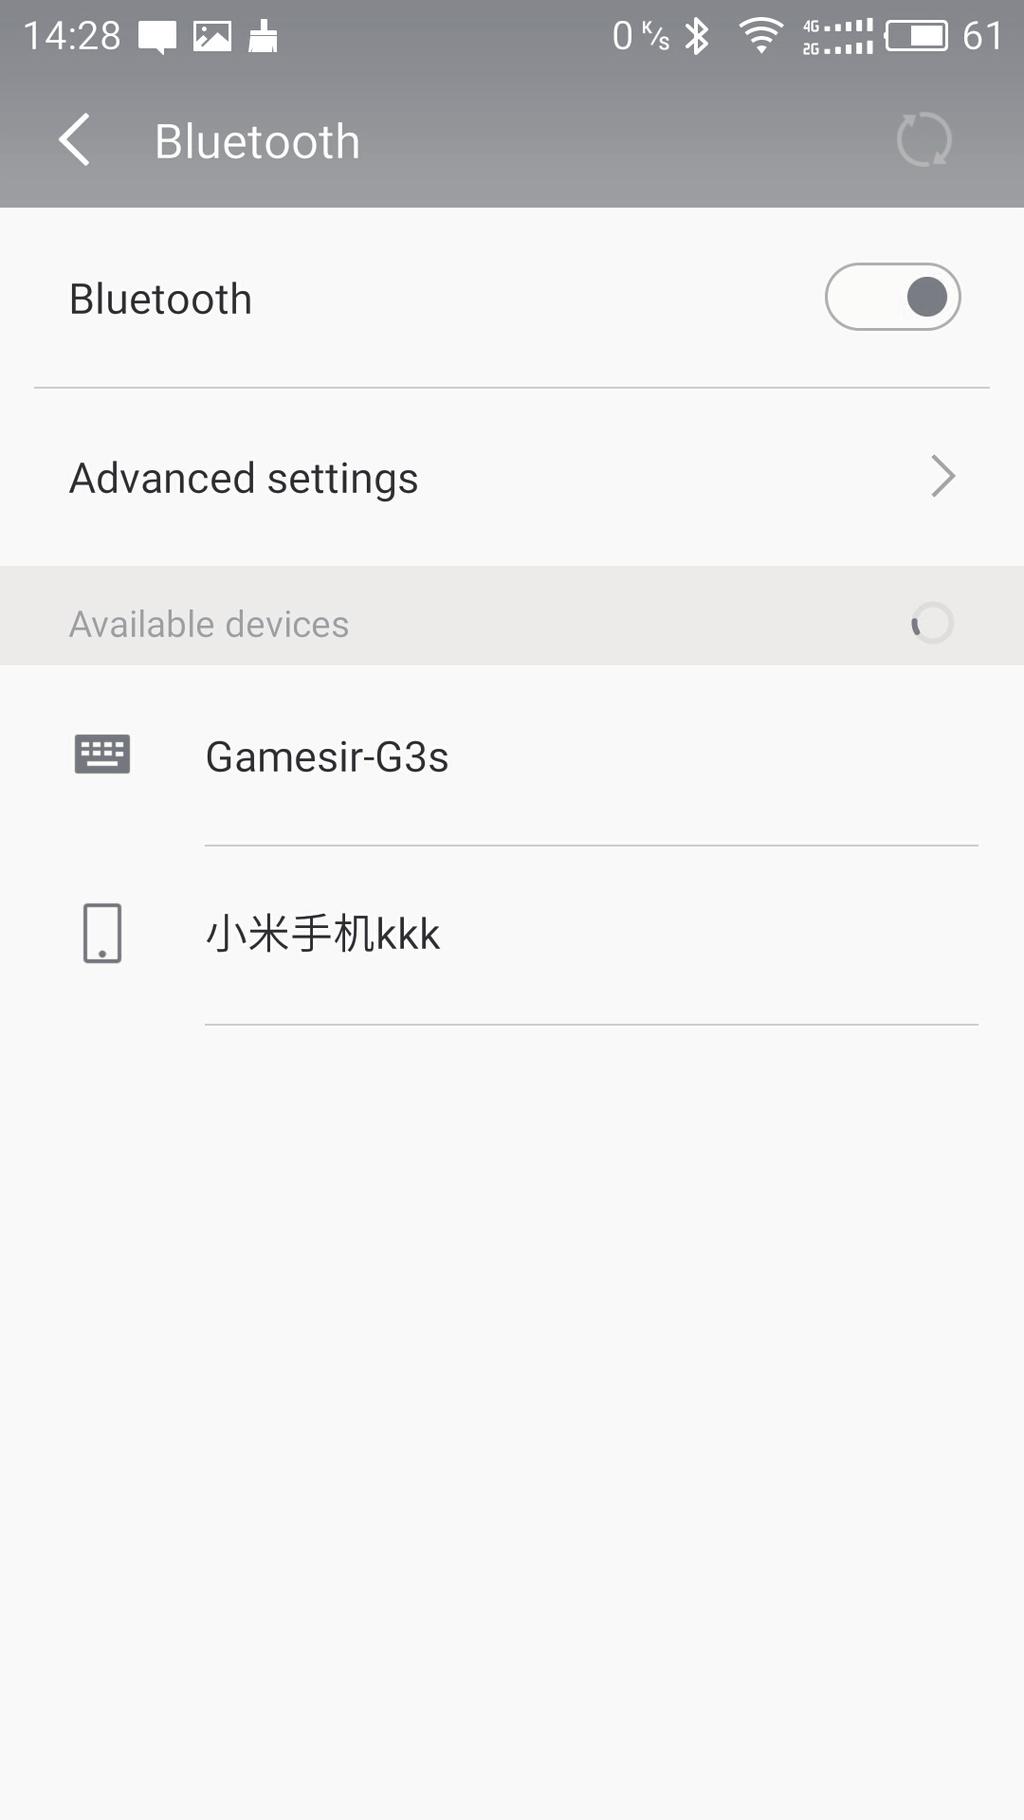 CHECKING AND CHARGING THE CONTROLLER CONNECTING ON ANDROID ( TABLETS / PHONES ) Before getting started, check the remaining power of your G4s at first, press the Home button in the front of the